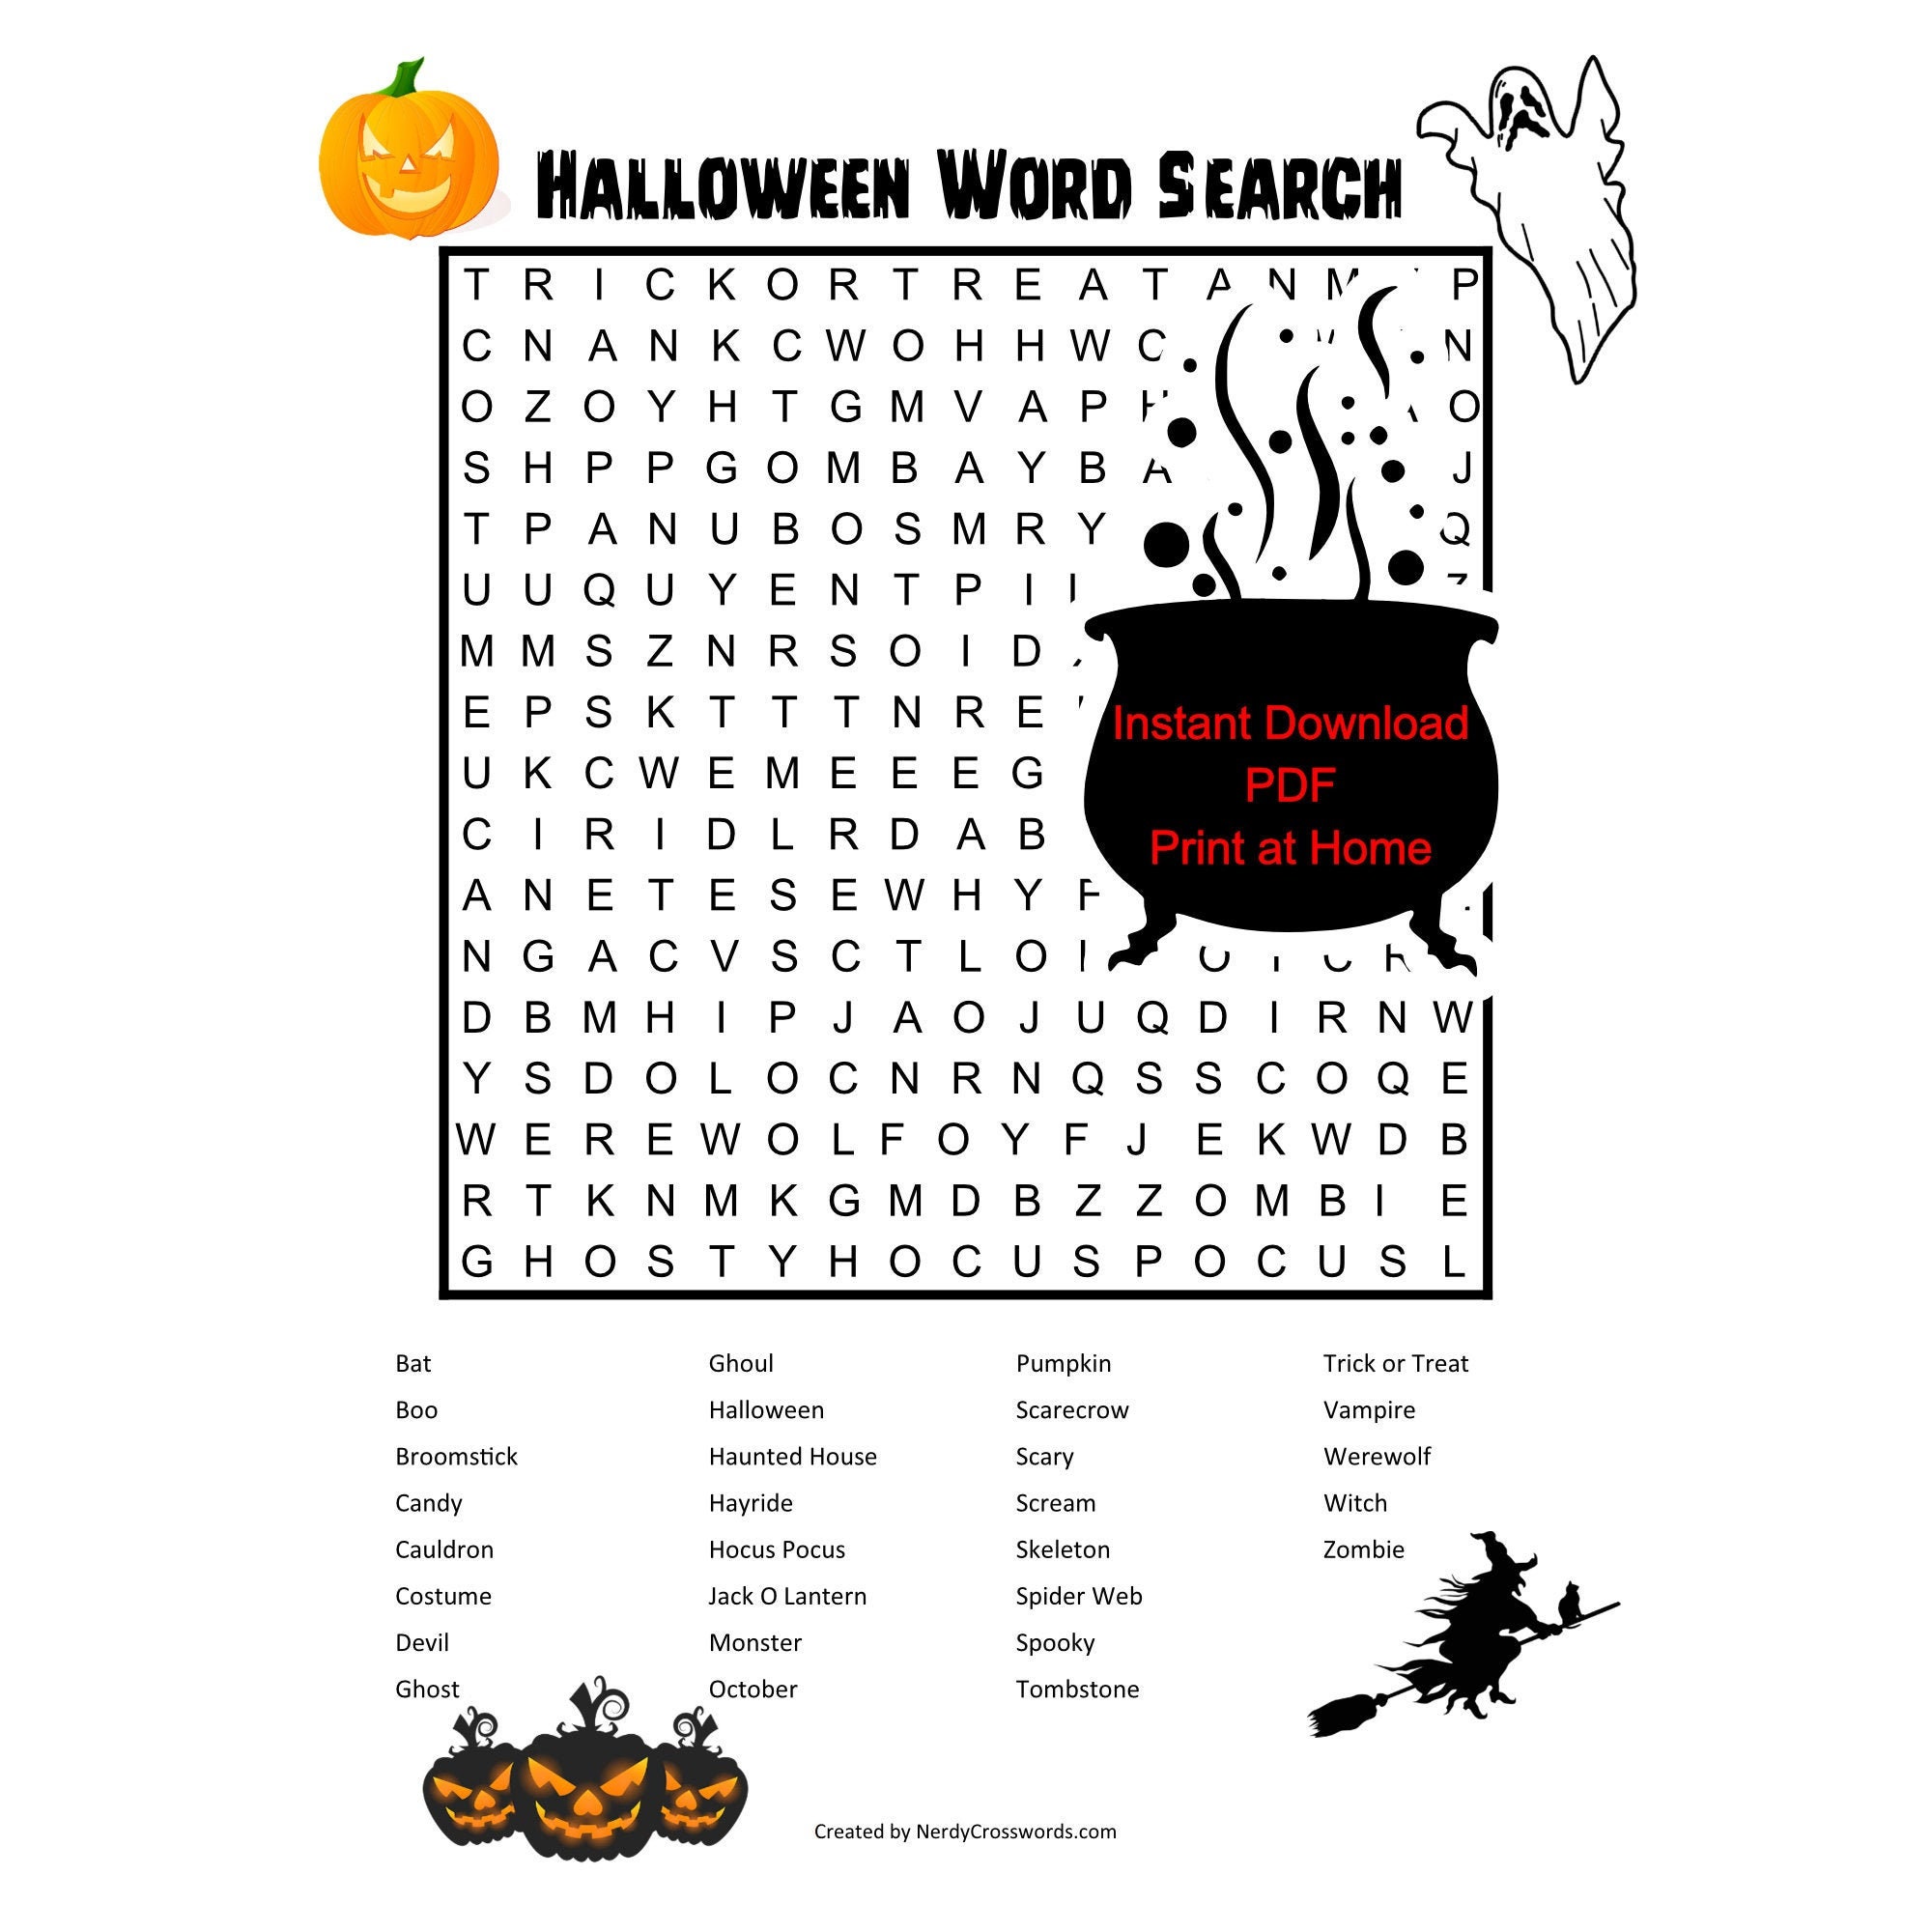 Printable Halloween Word Search 8.5 by 11 inch